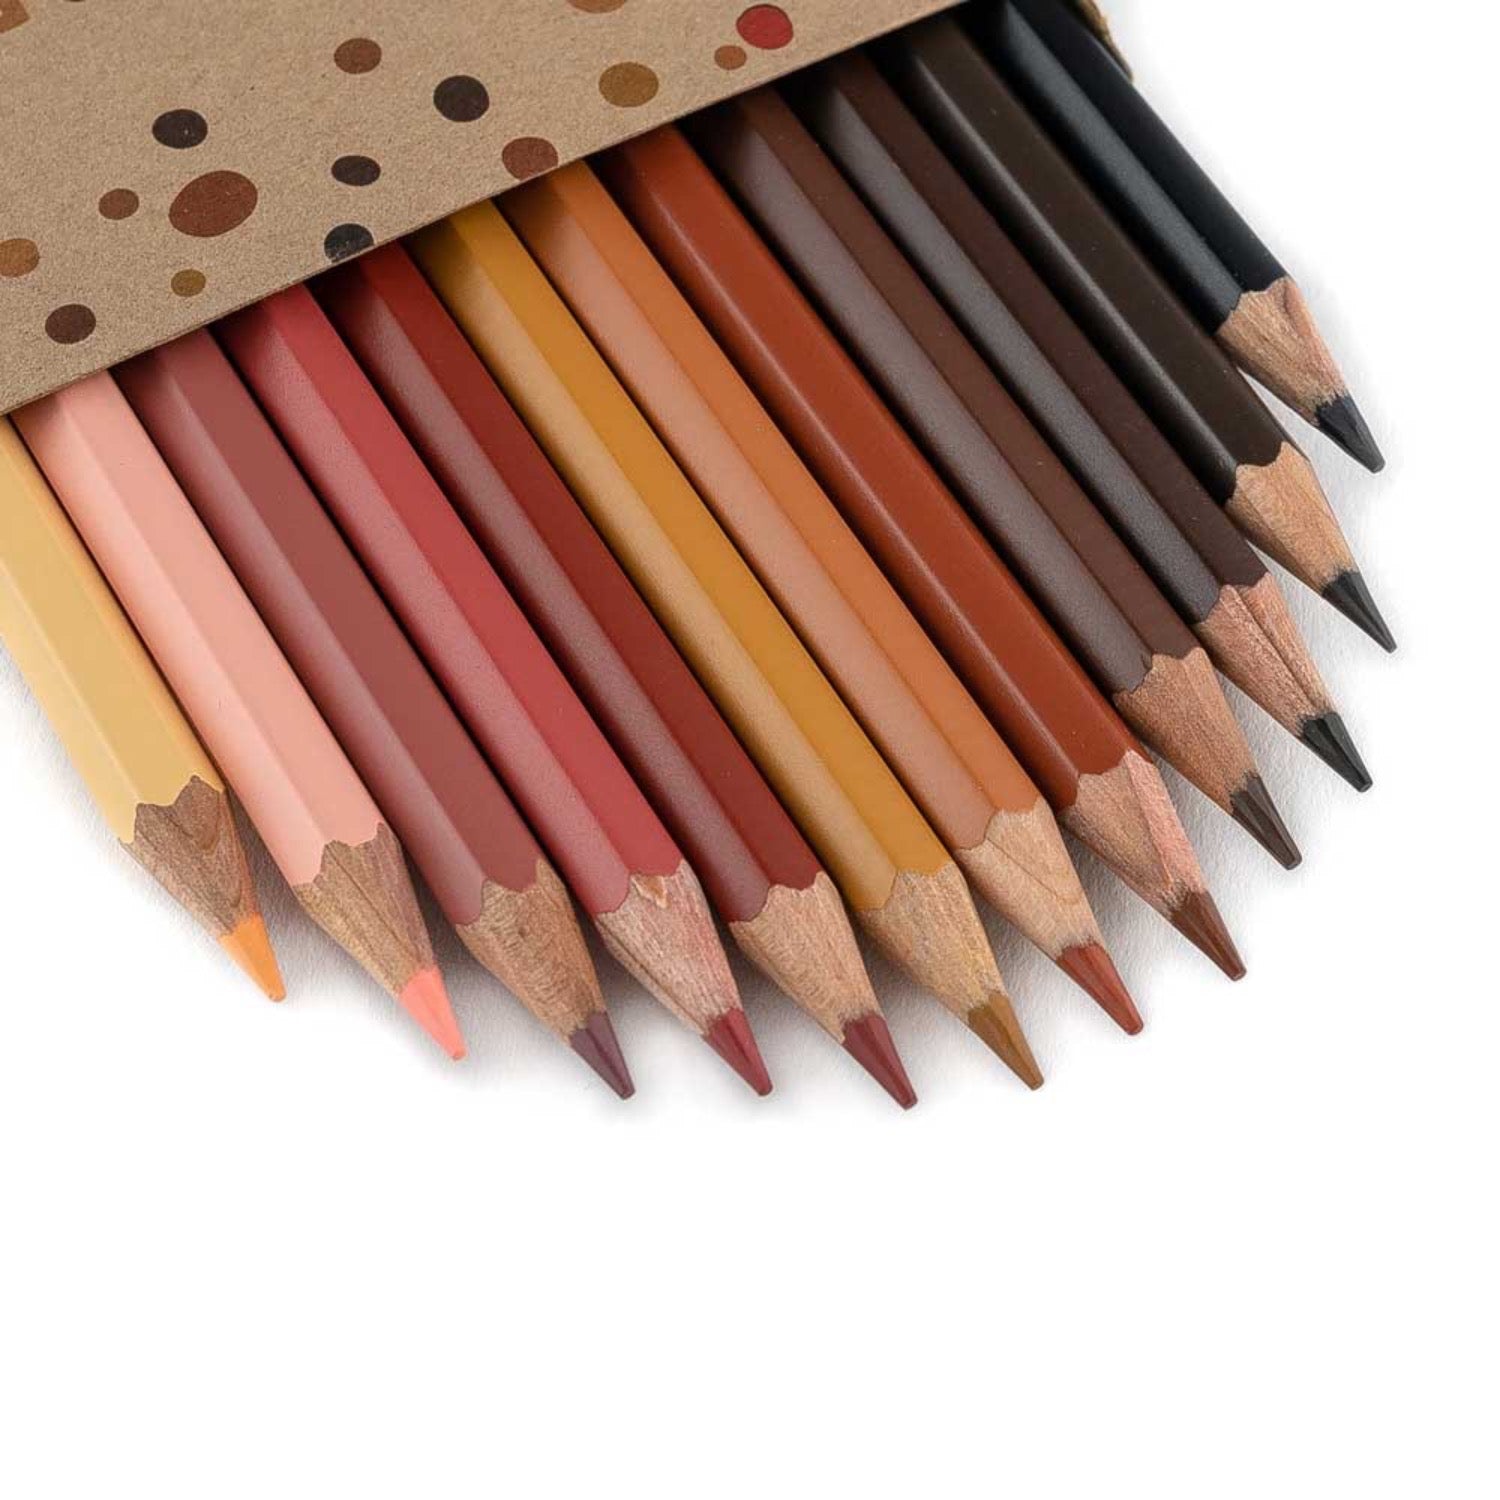 skin toned colouring pencils for drawing people